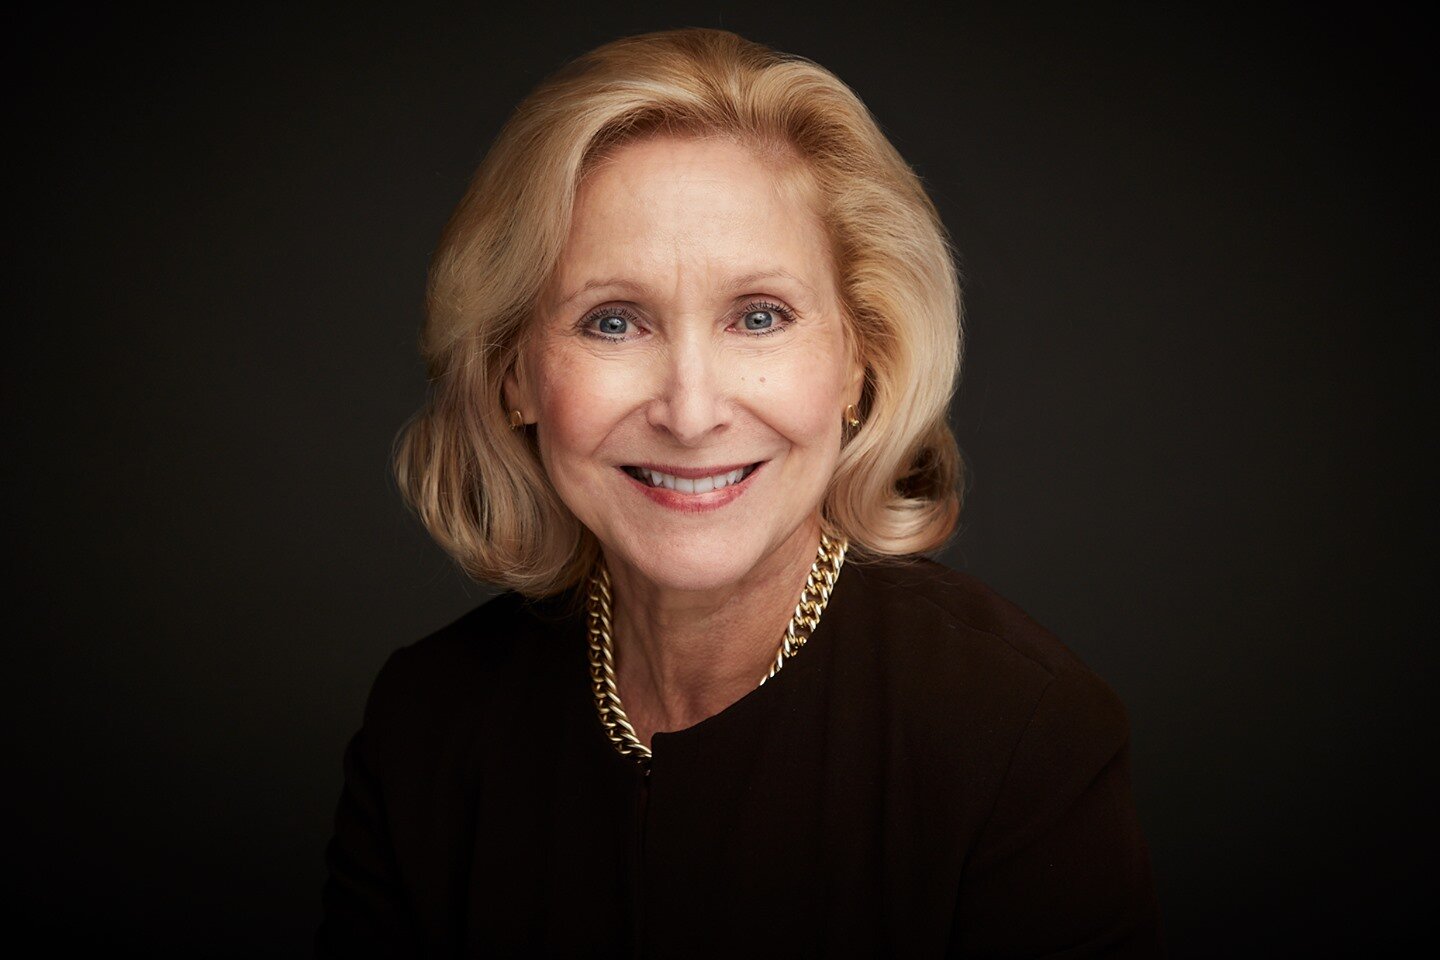 As a WBENC certified Women Owned Biz we are highlighting the fabulous Susan Johnson (http://ow.ly/b28J50DT5iB). She has recently struck out on her own, but for 7 years was part of WPEO, the NY affiliate, advocating daily for women in business. #women